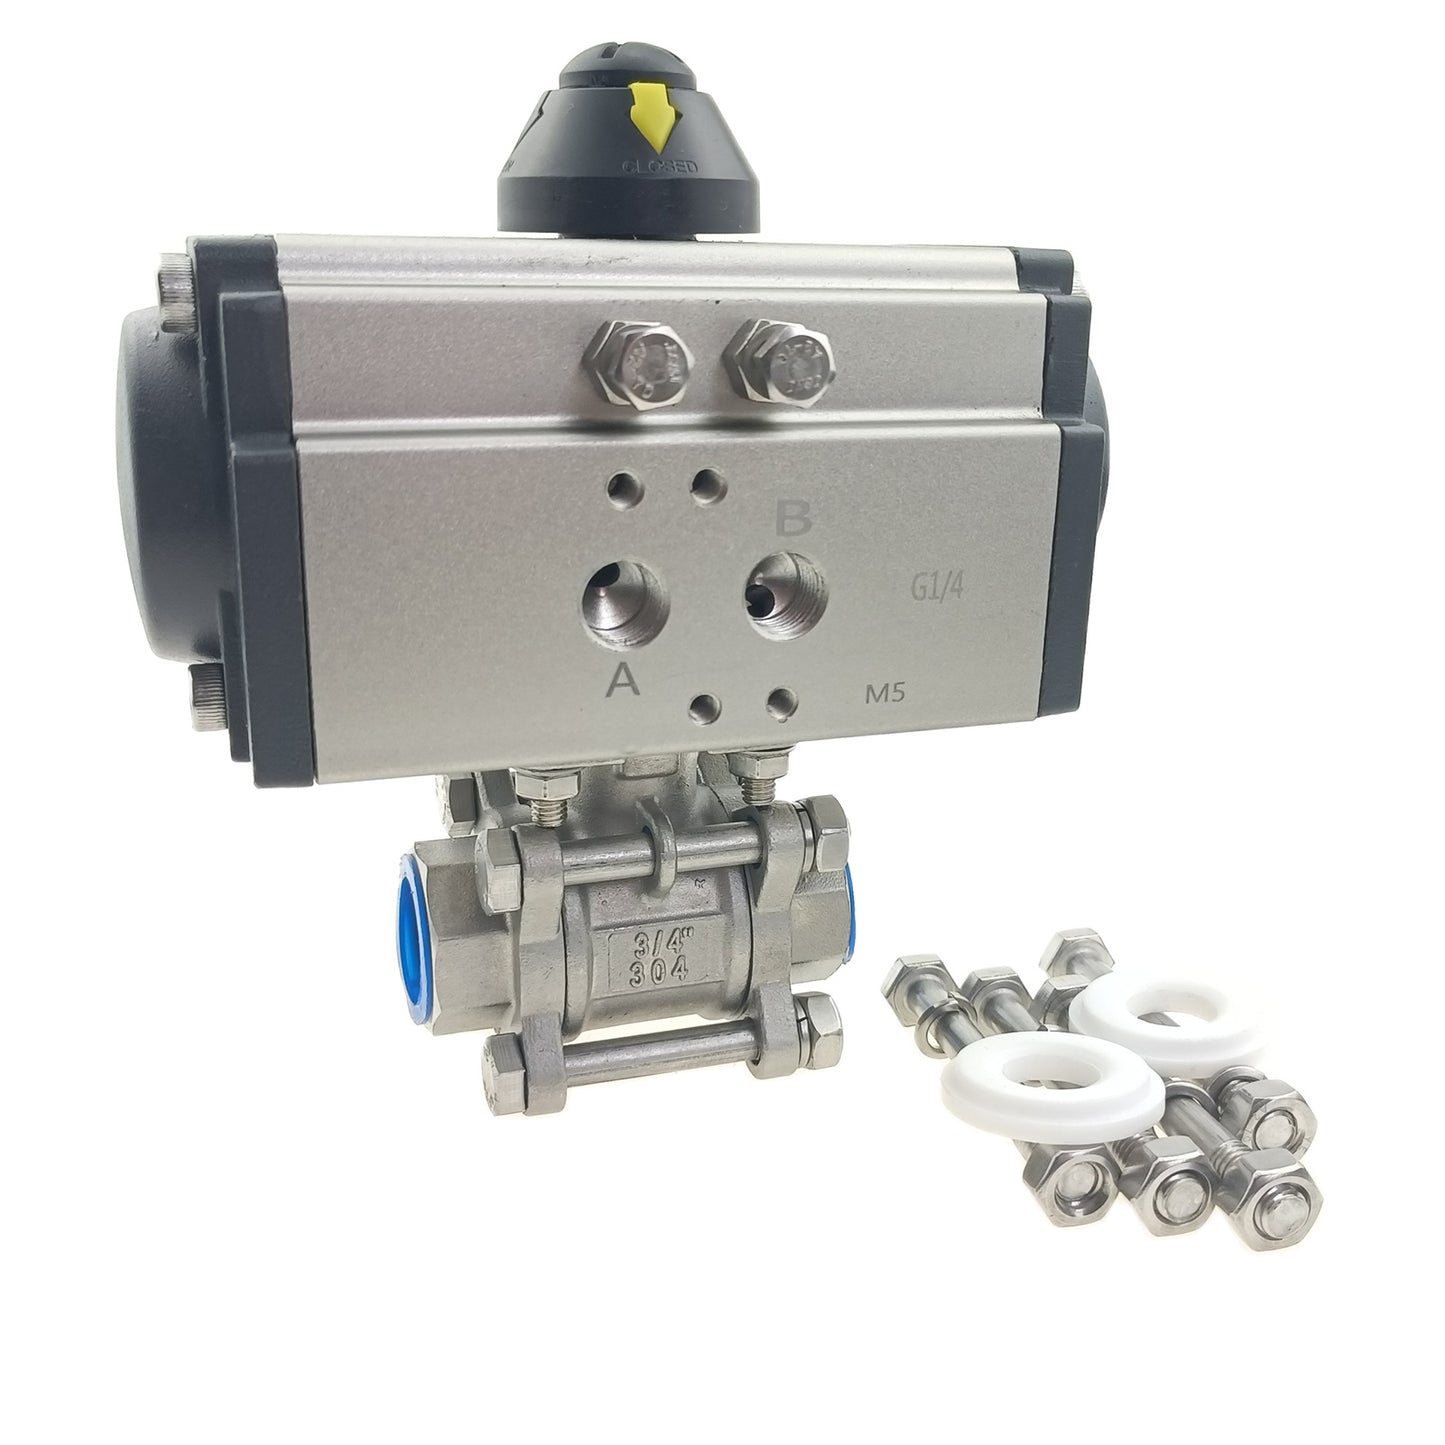 Stainless Steel Double Acting NC Pneumatic Actuated FNPT Threade Ball Valve 3-pc Bolted Type with Repair Kit